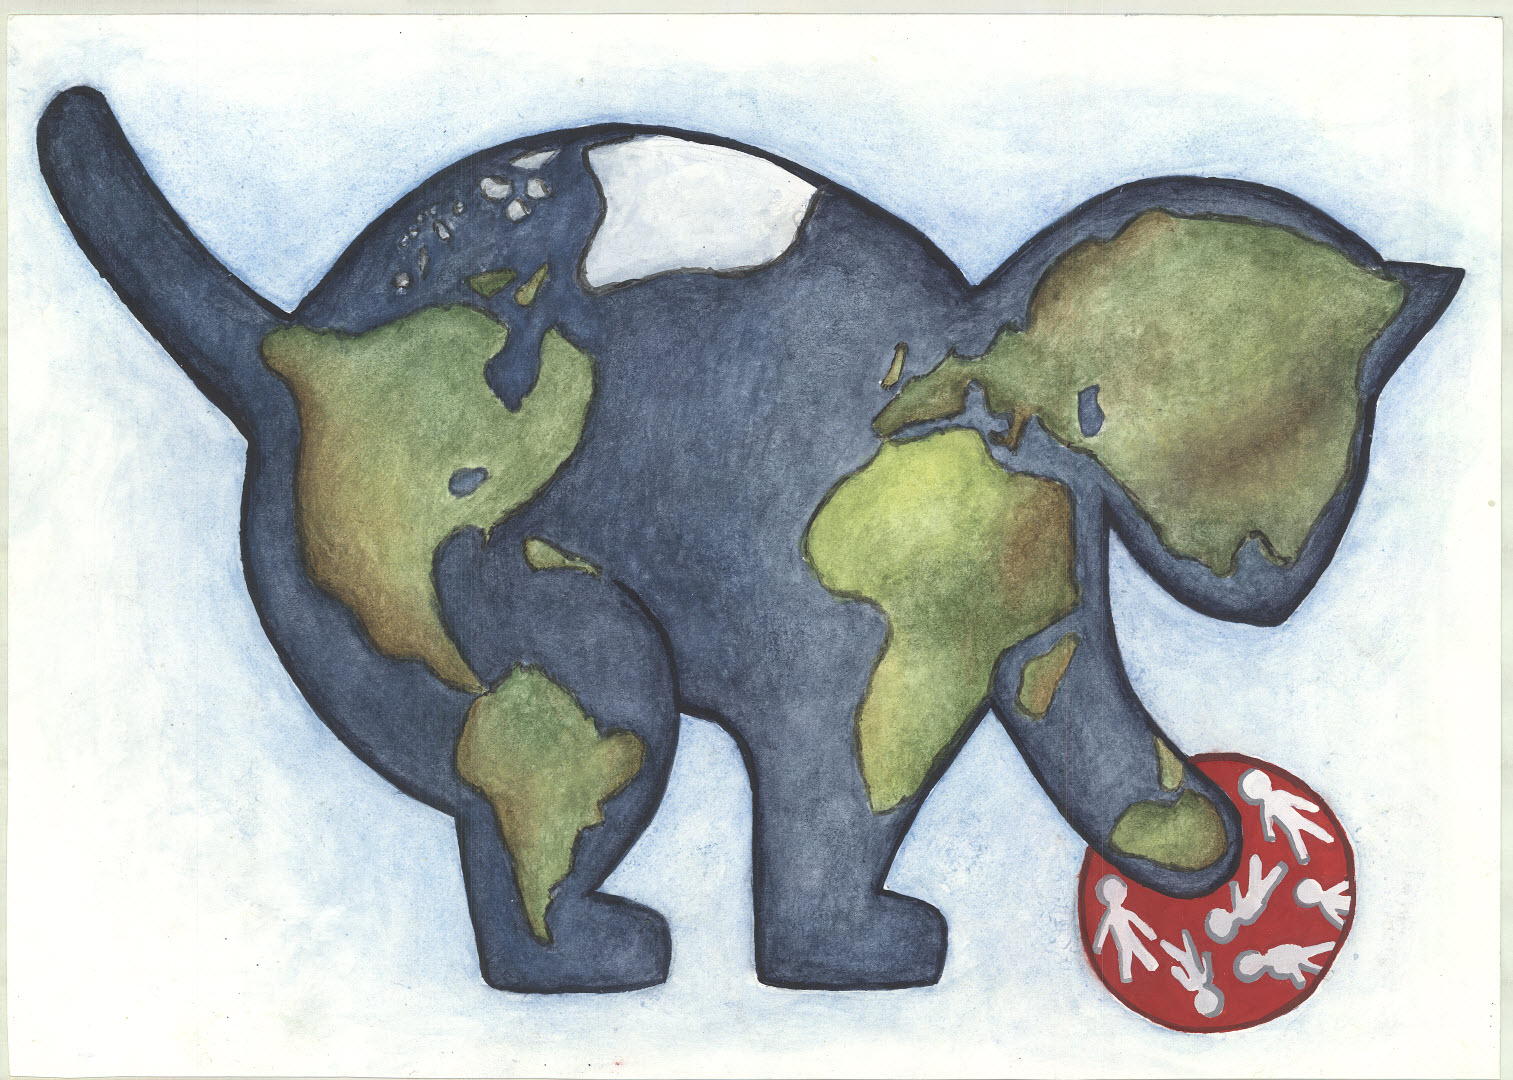 Shows the world in the shape of a cat playing with a ball which includes people